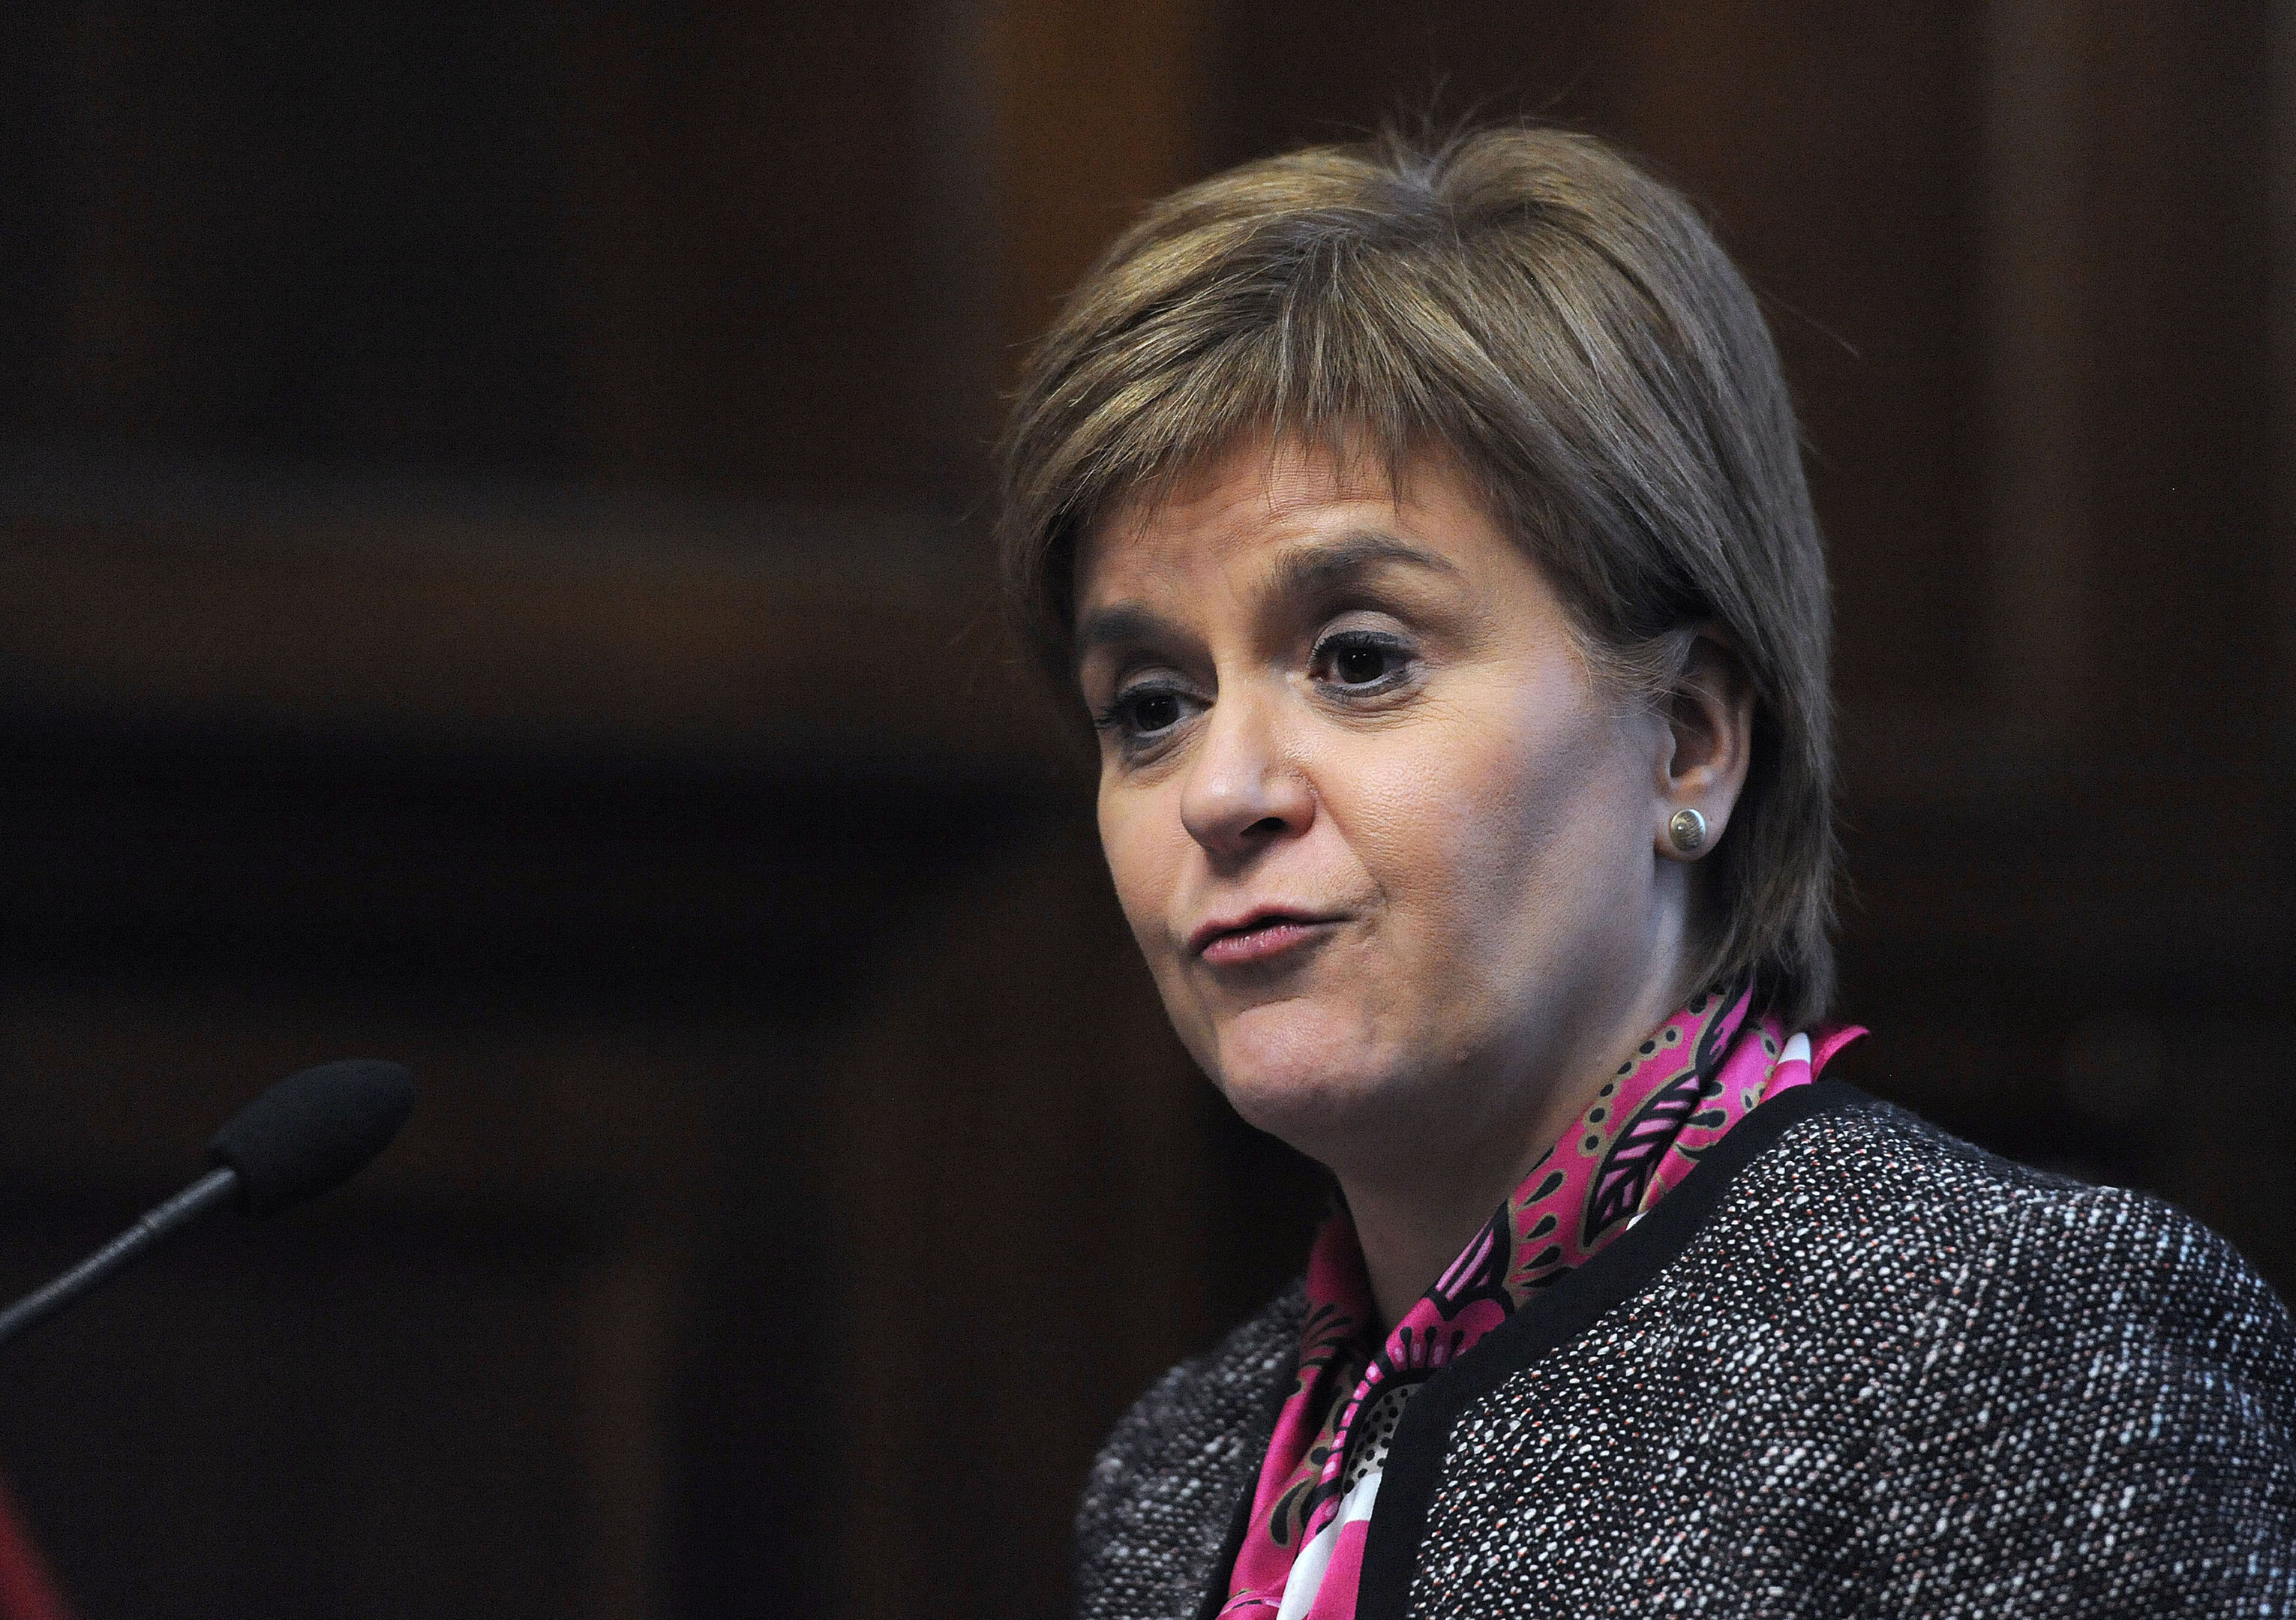 Jenny says Nicola Sturgeon is ignoring advice from inside and outside her party.